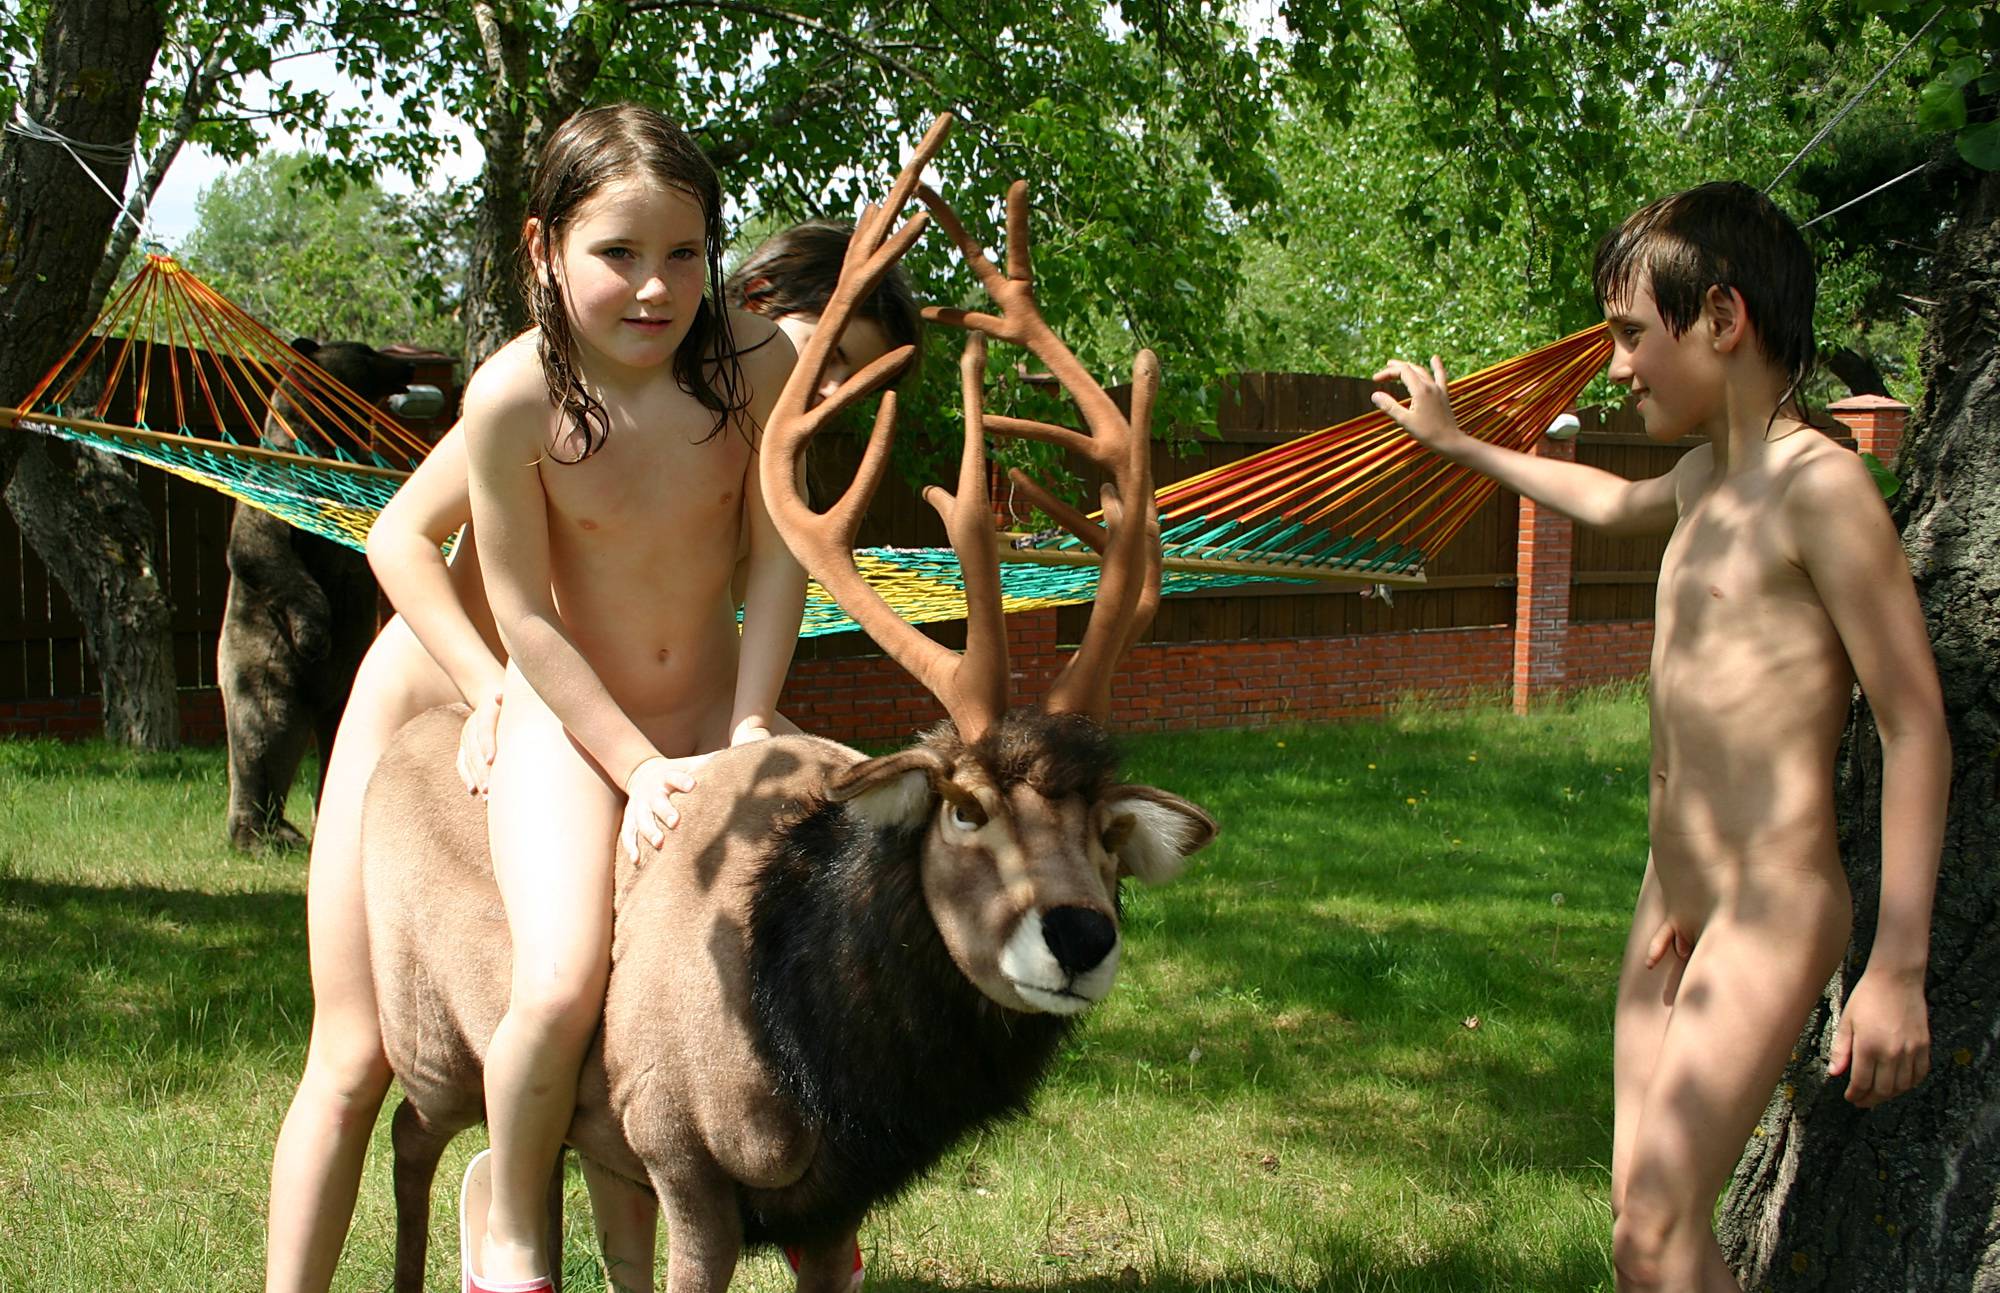 Bring Out Outdoor Moose Nudist Pics - 2